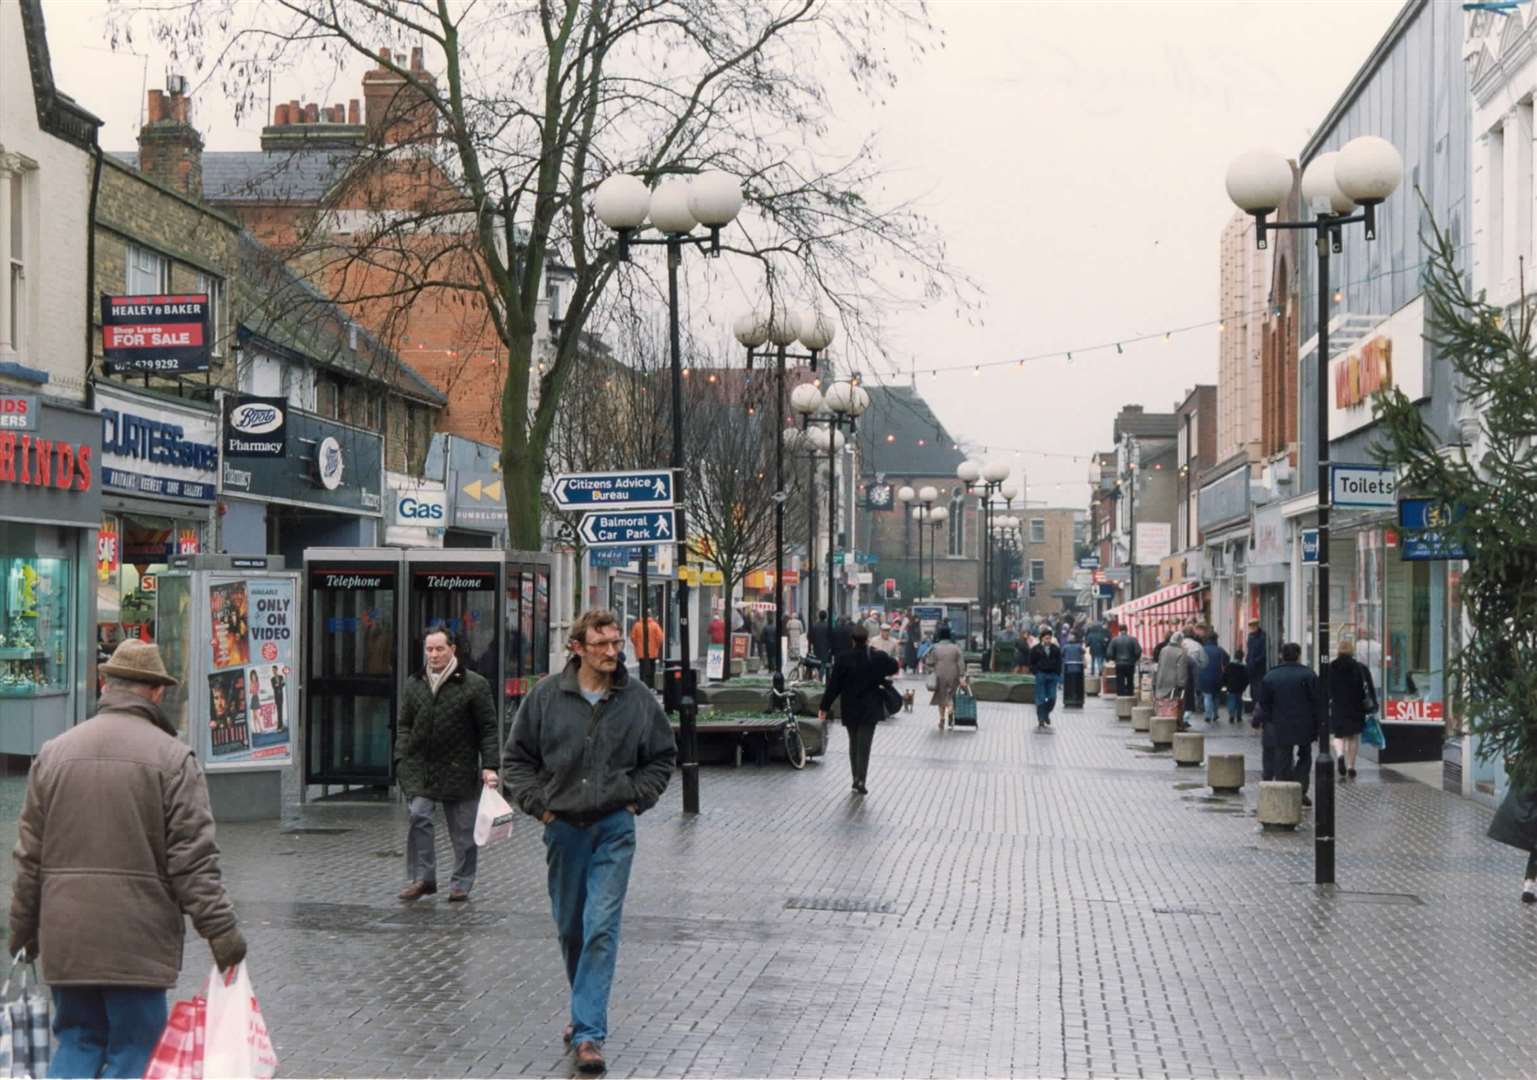 Woolworths can be seen on the right of this picture of Gillingham High Street, taken on January 14, 1993. The building is now a Poundland